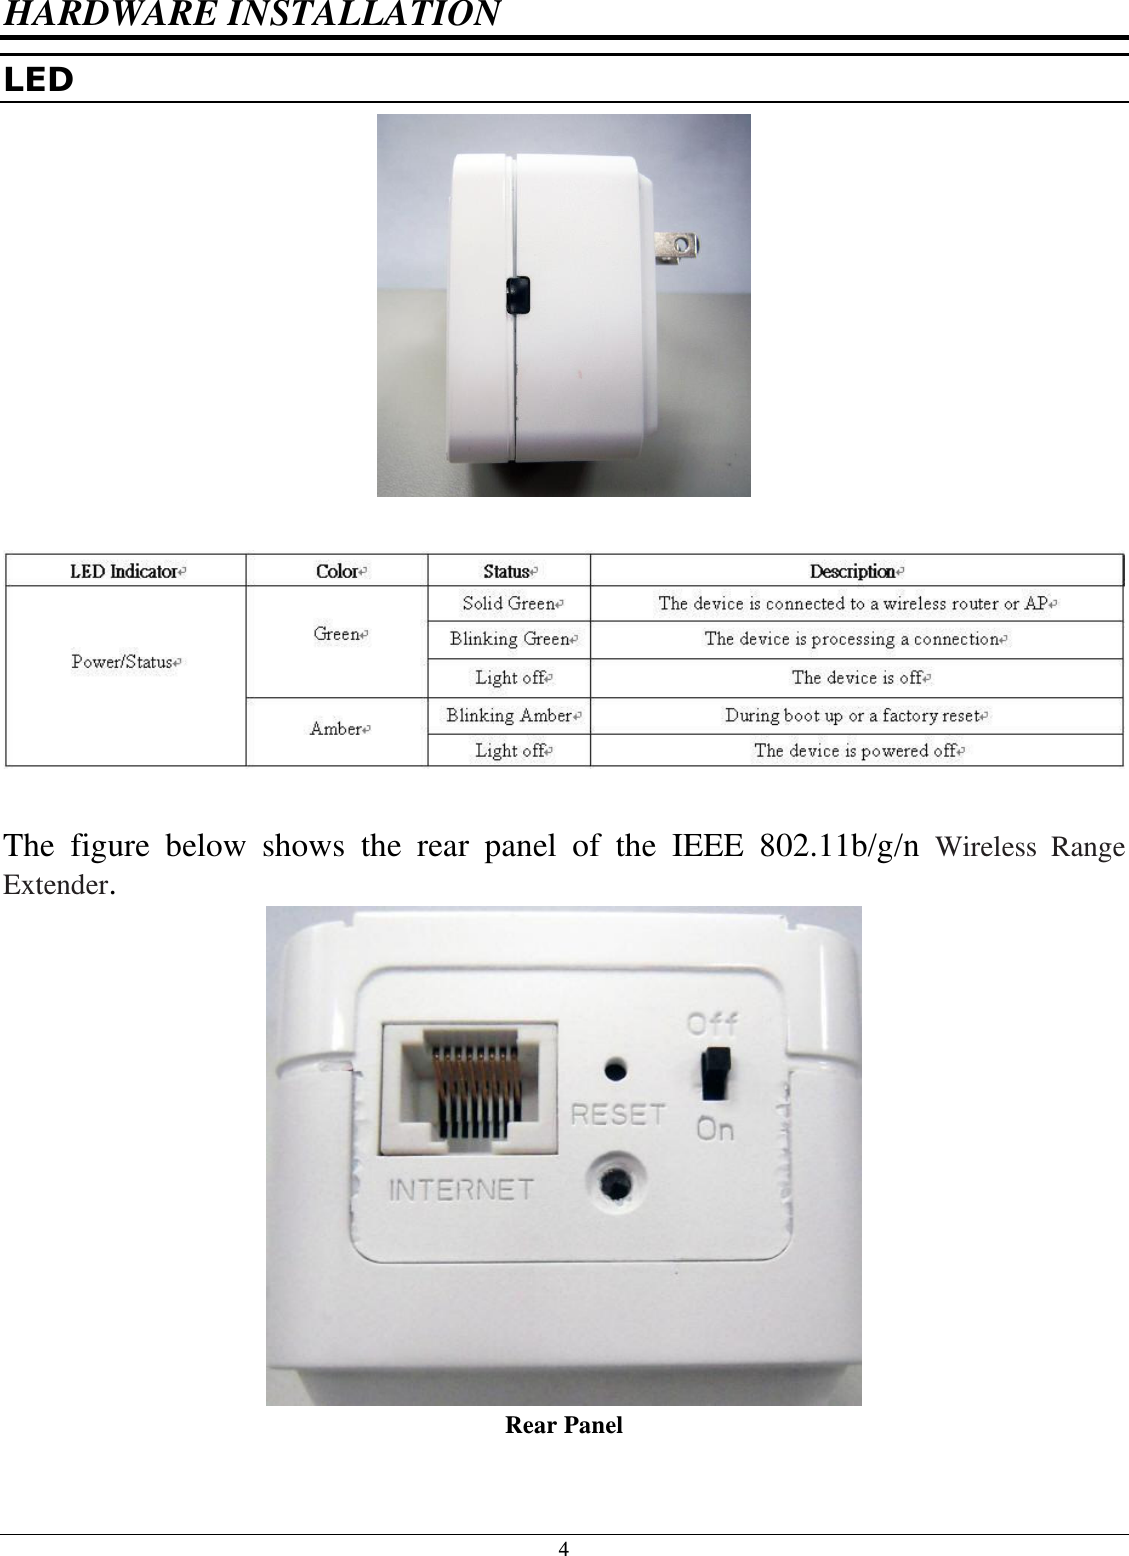 4 HARDWARE INSTALLATION LED     The  figure  below  shows  the  rear  panel  of  the  IEEE  802.11b/g/n  Wireless  Range Extender.  Rear Panel  